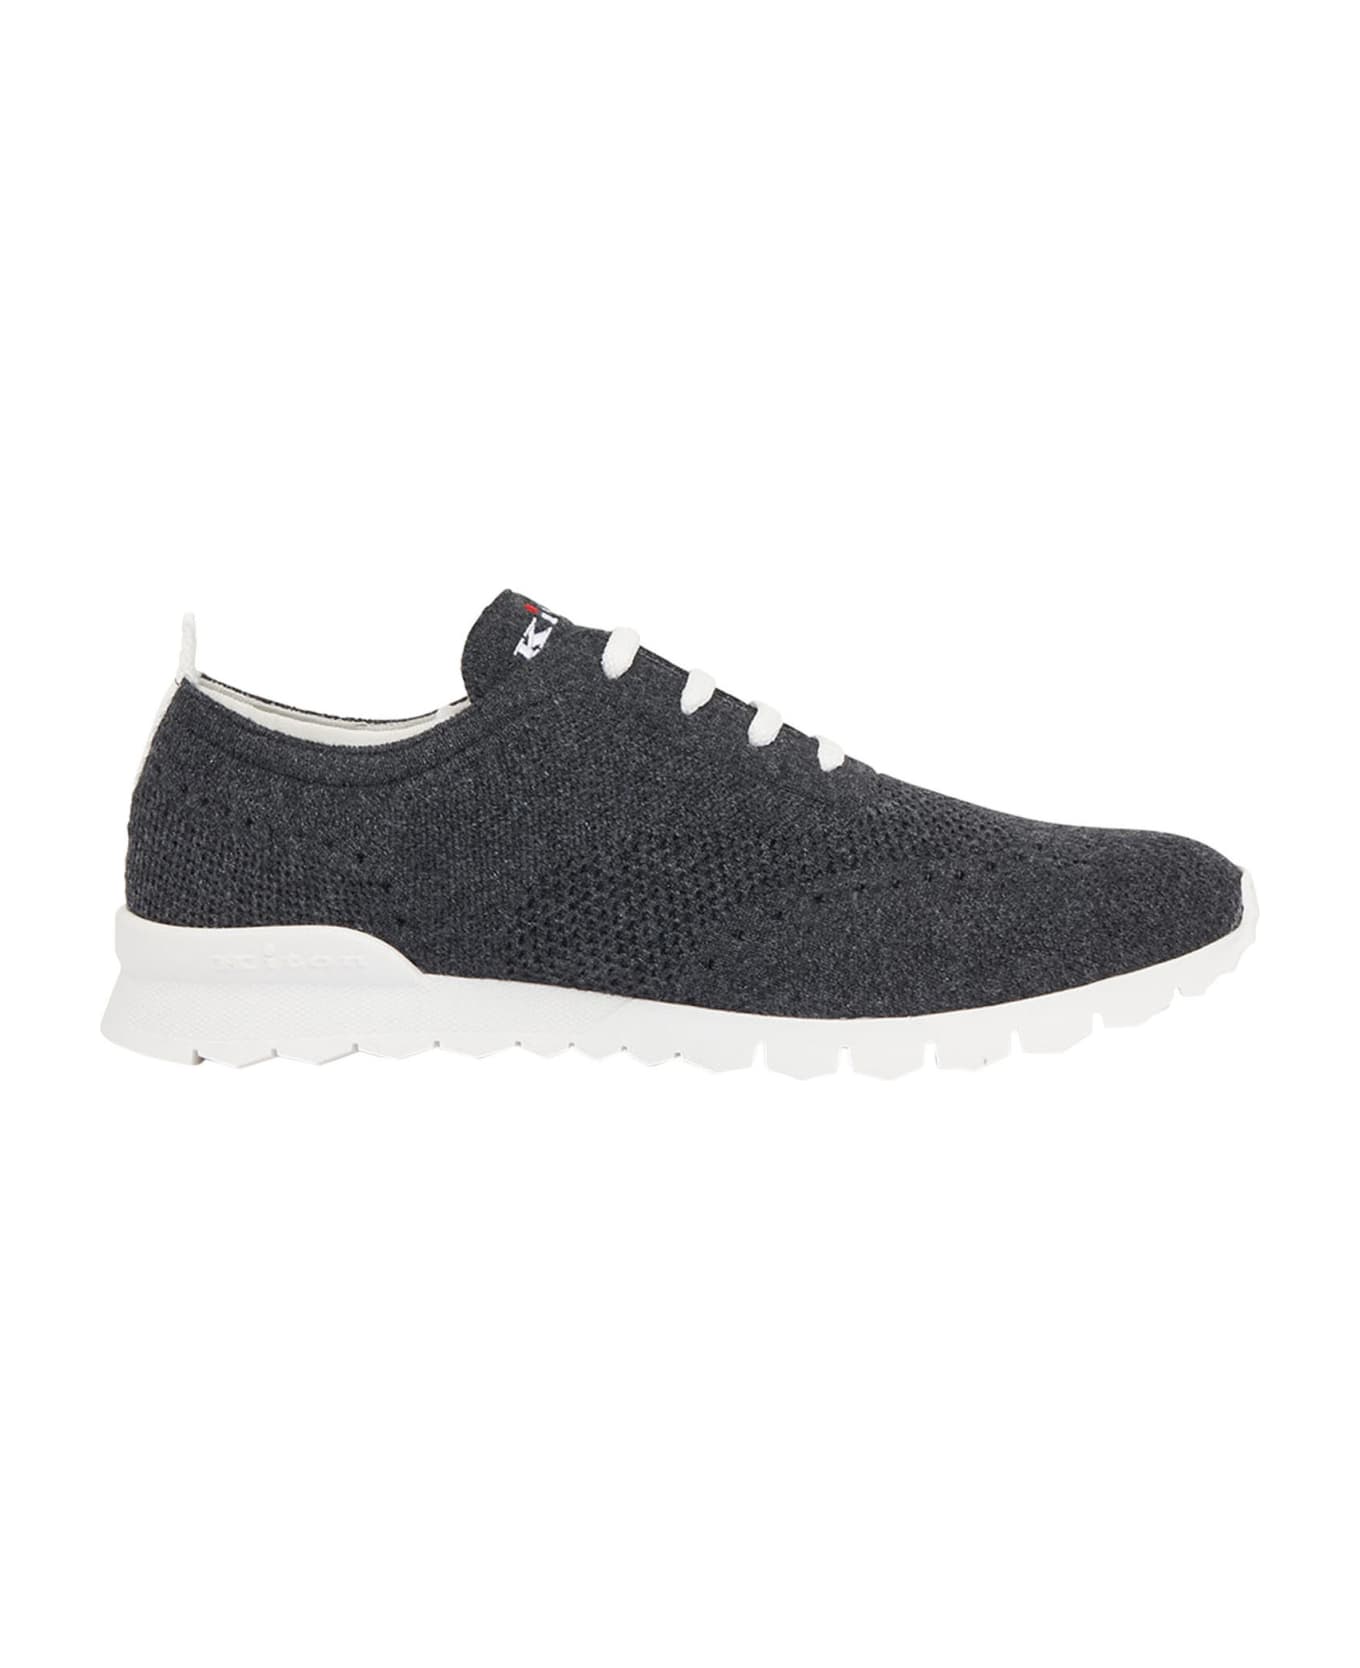 Kiton Sneakers Shoes Cashmere - ANTHRACITE スニーカー